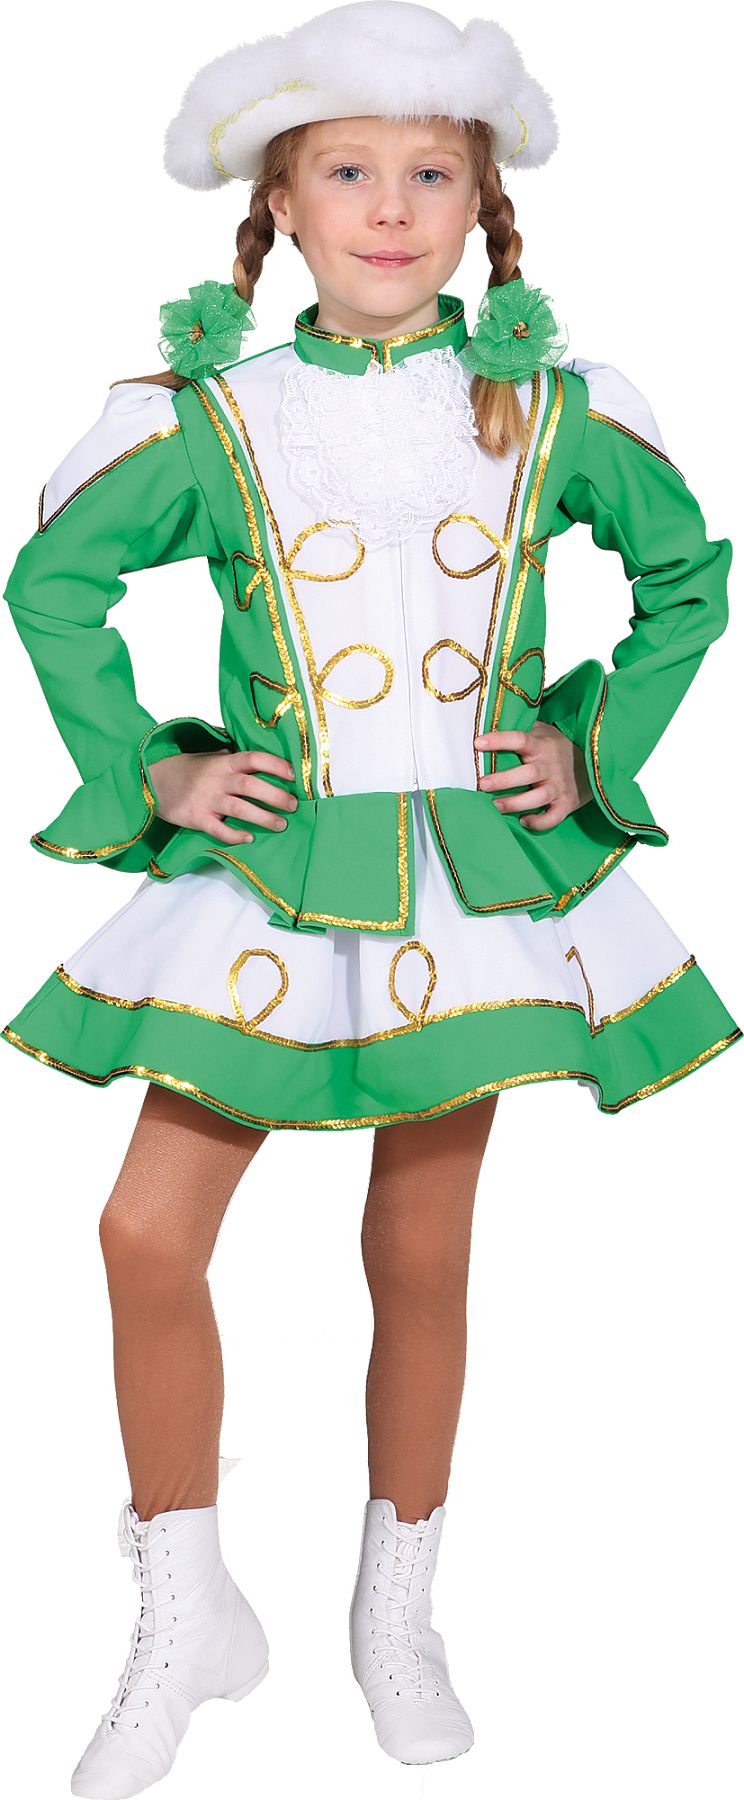 Sparkl costume, green-white with gold trim